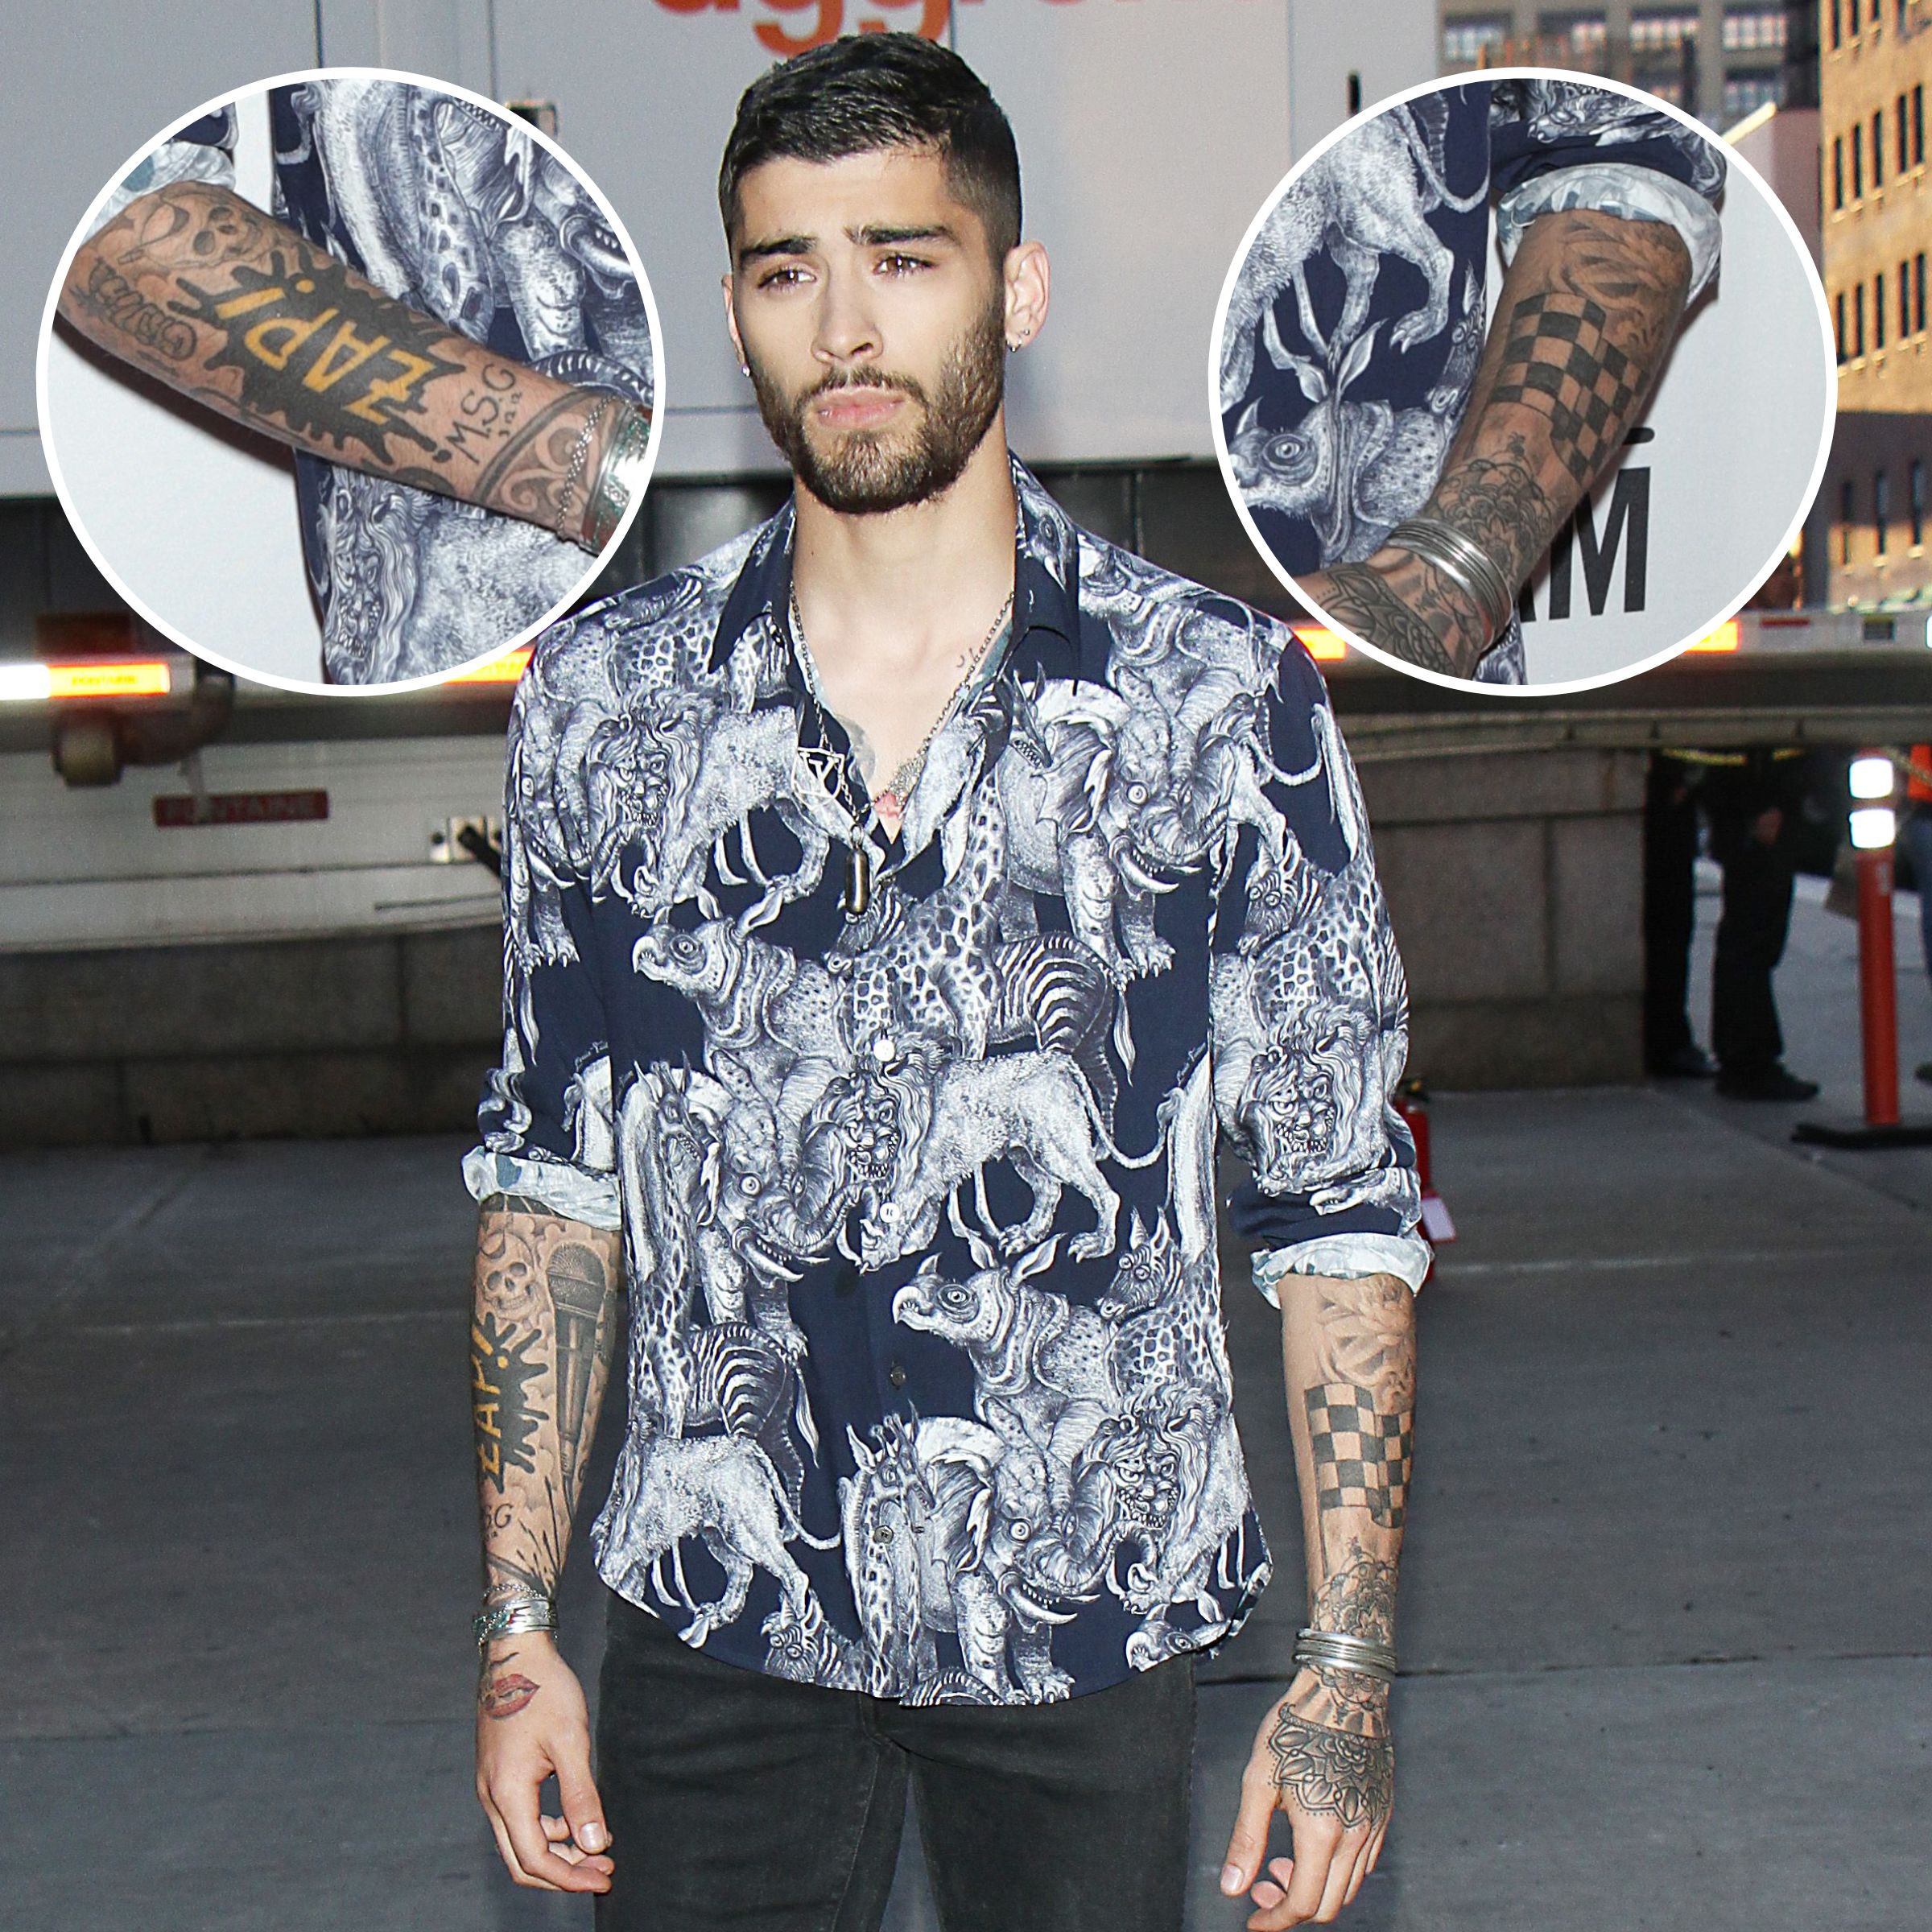 Top 15 Zayn Malik Tattoo Designs with Meanings